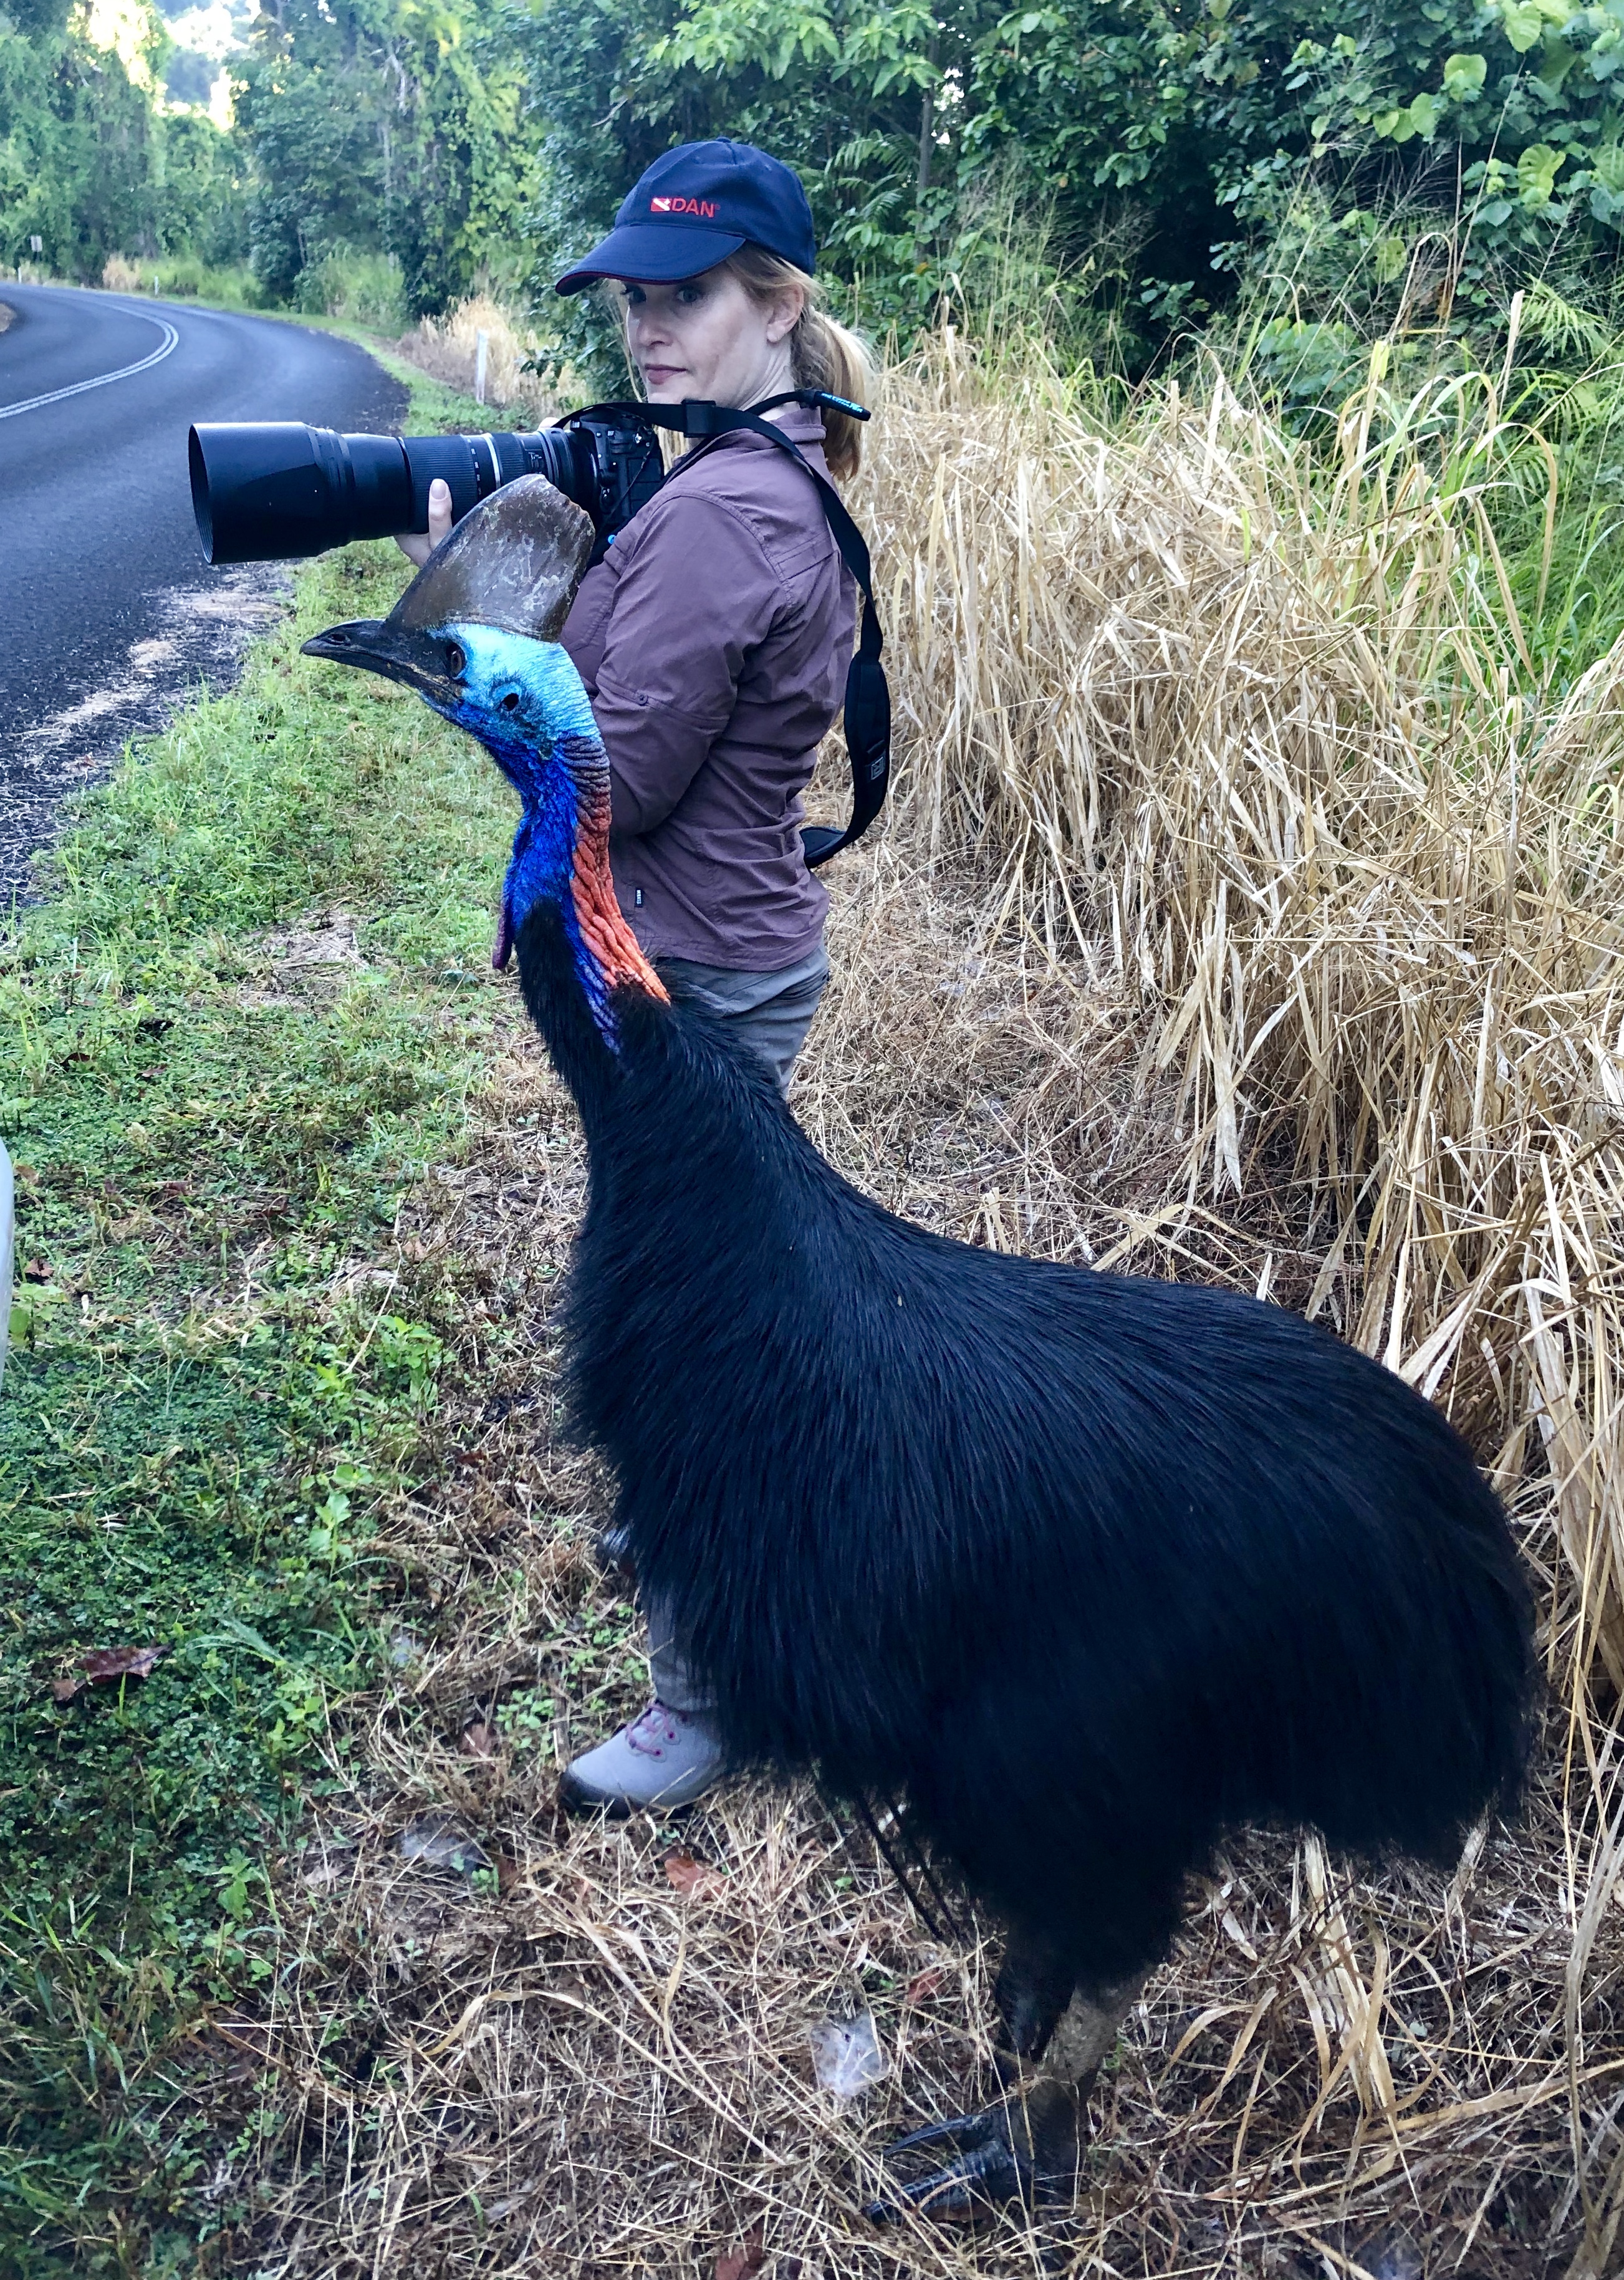 Dr. Bangasser displaying freezing behavior during an encounter with a cassowary, which at least one source claims is the world’s most dangerous bird.